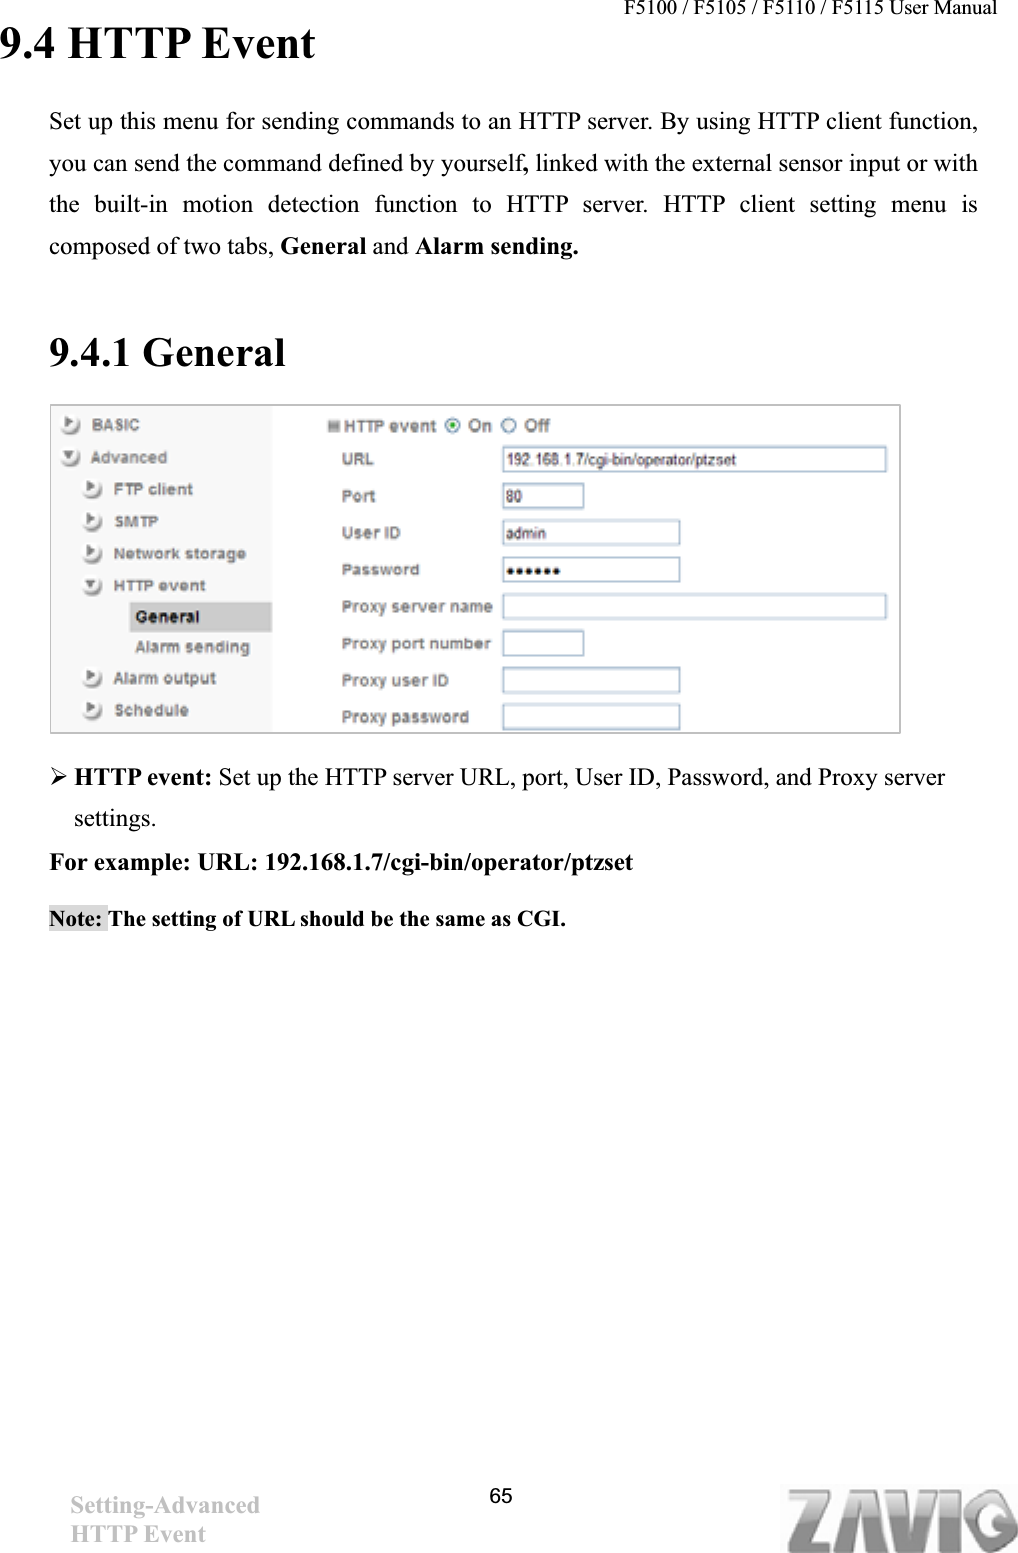 F5100 / F5105 / F5110 / F5115 User Manual   9.4 HTTP Event Set up this menu for sending commands to an HTTP server. By using HTTP client function, you can send the command defined by yourself,linked with the external sensor input or with the built-in motion detection function to HTTP server. HTTP client setting menu is composed of two tabs, General and Alarm sending. 9.4.1 General     ¾HTTP event: Set up the HTTP server URL, port, User ID, Password, and Proxy server settings.For example: URL: 192.168.1.7/cgi-bin/operator/ptzset Note: The setting of URL should be the same as CGI.Setting-AdvancedHTTP Event   65